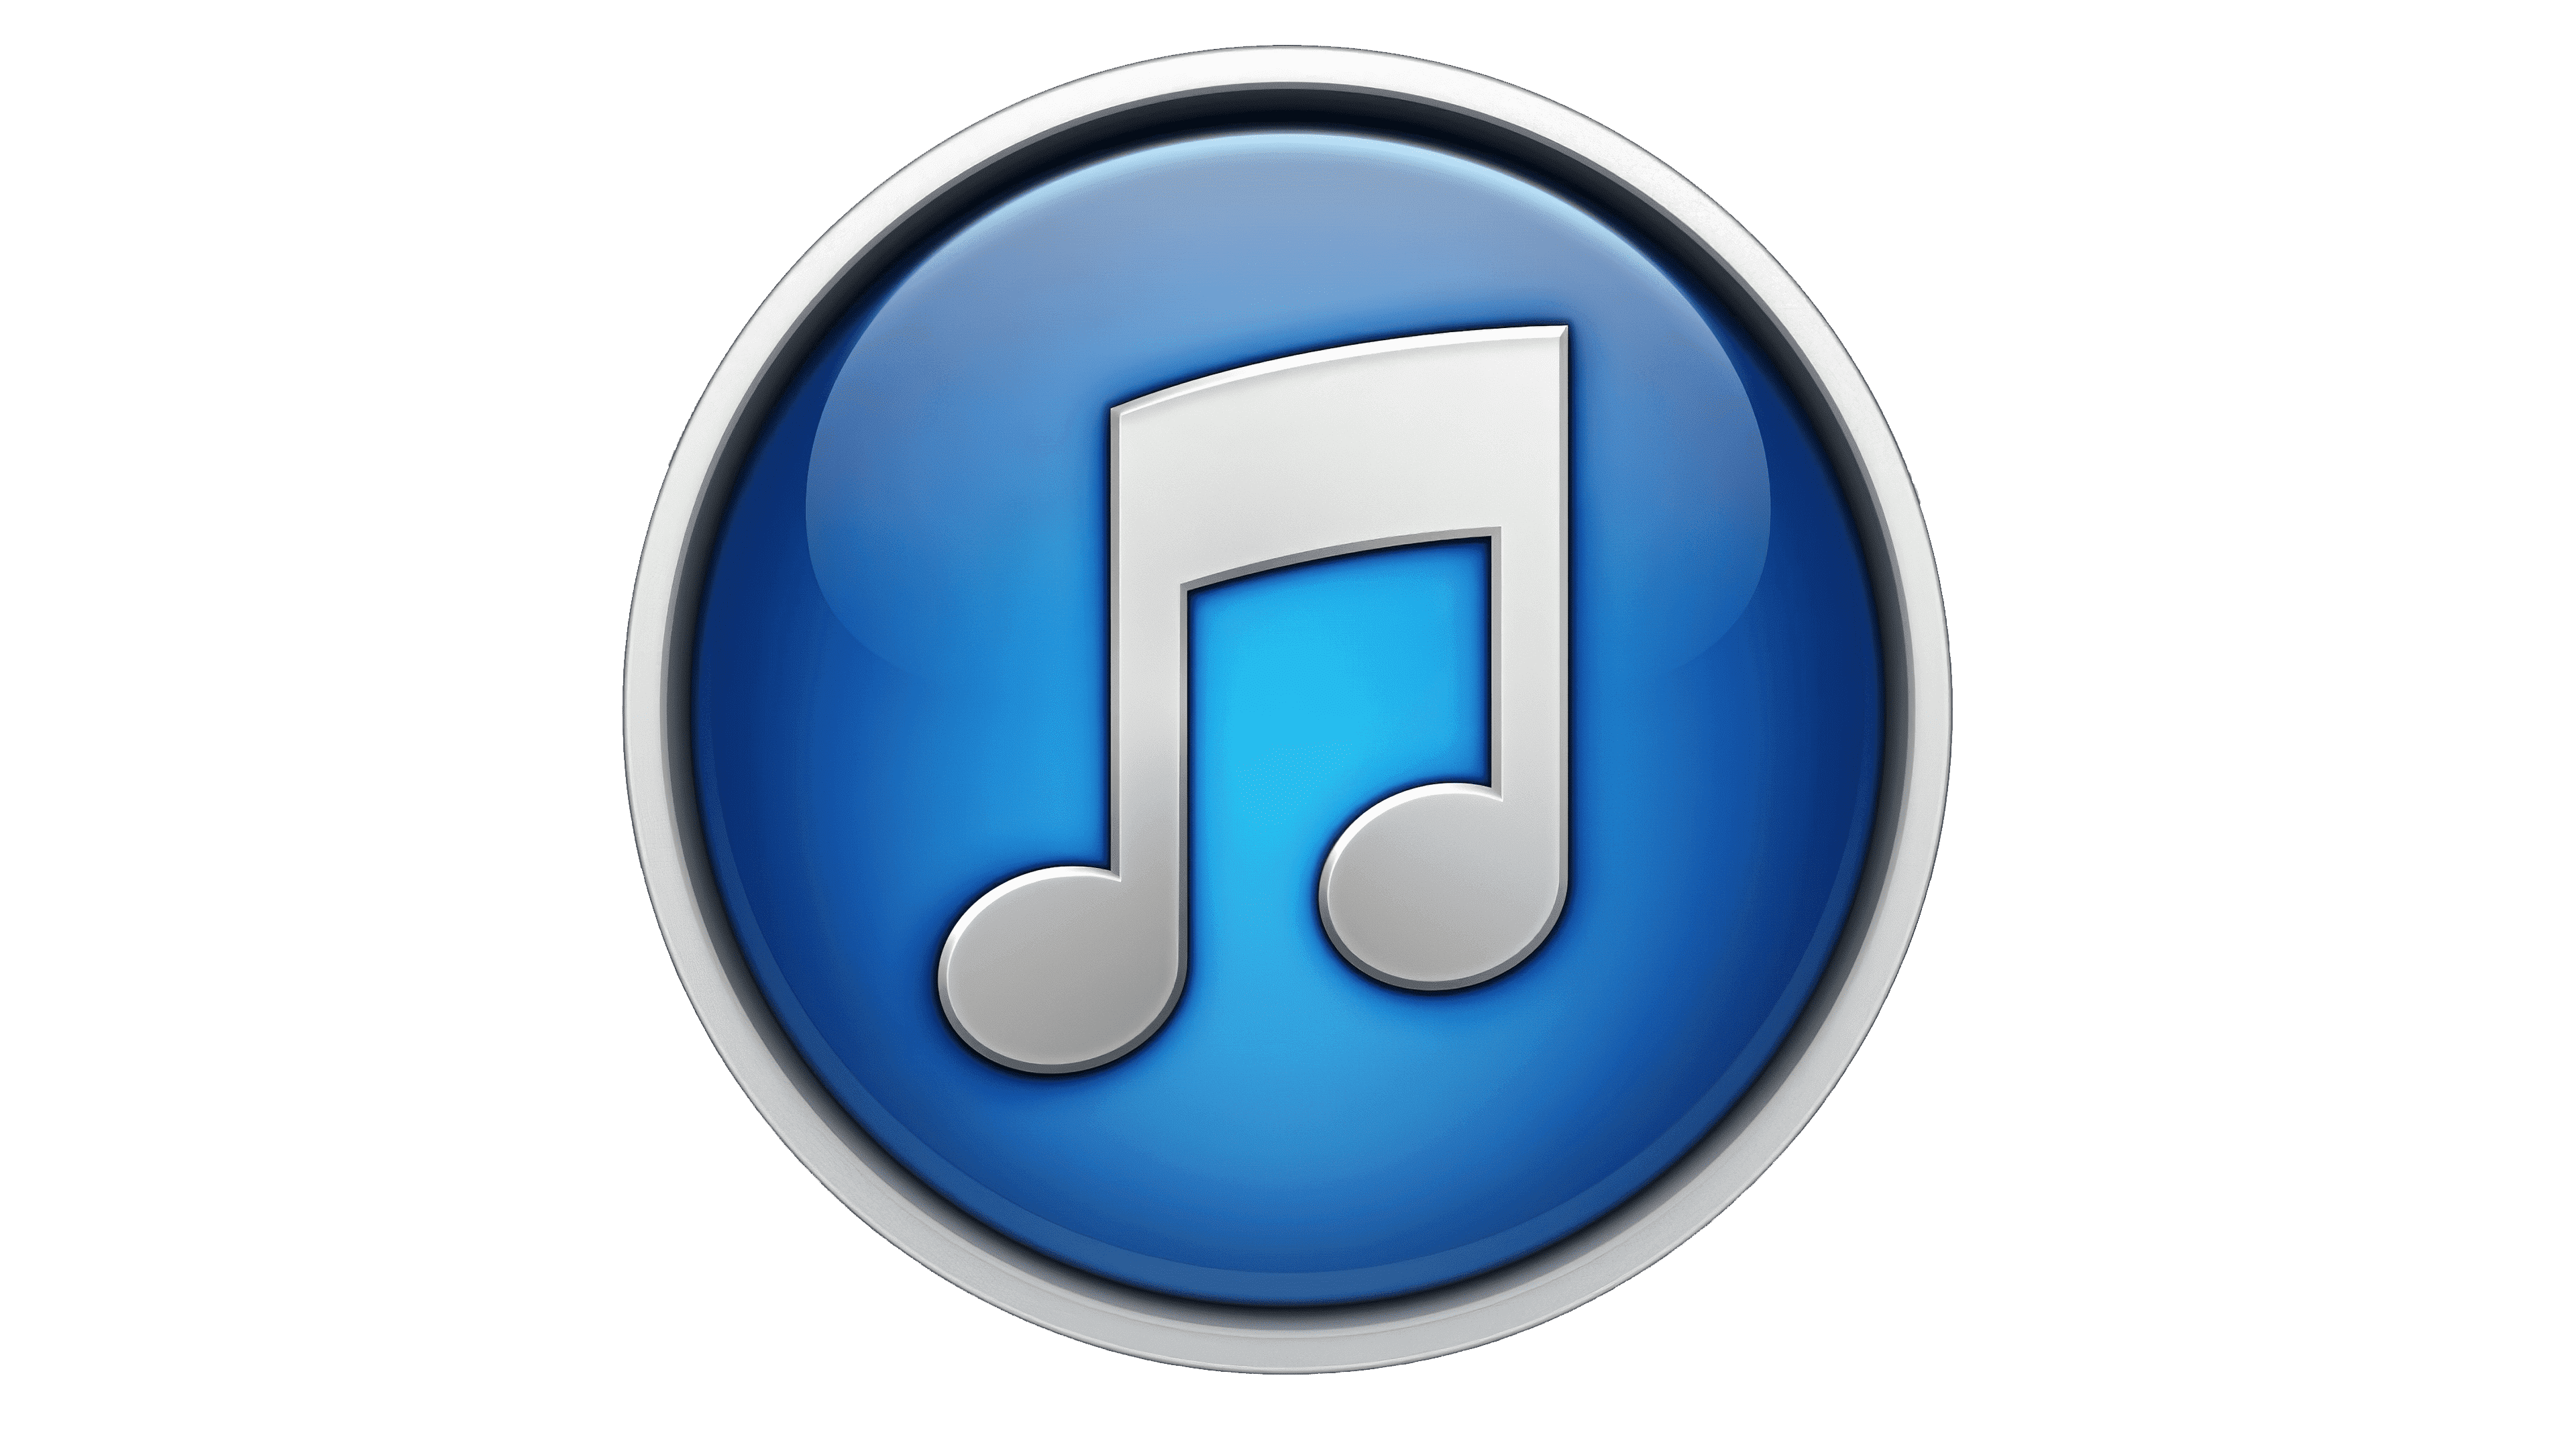 Itunes Logo Symbol Meaning History Png Brand